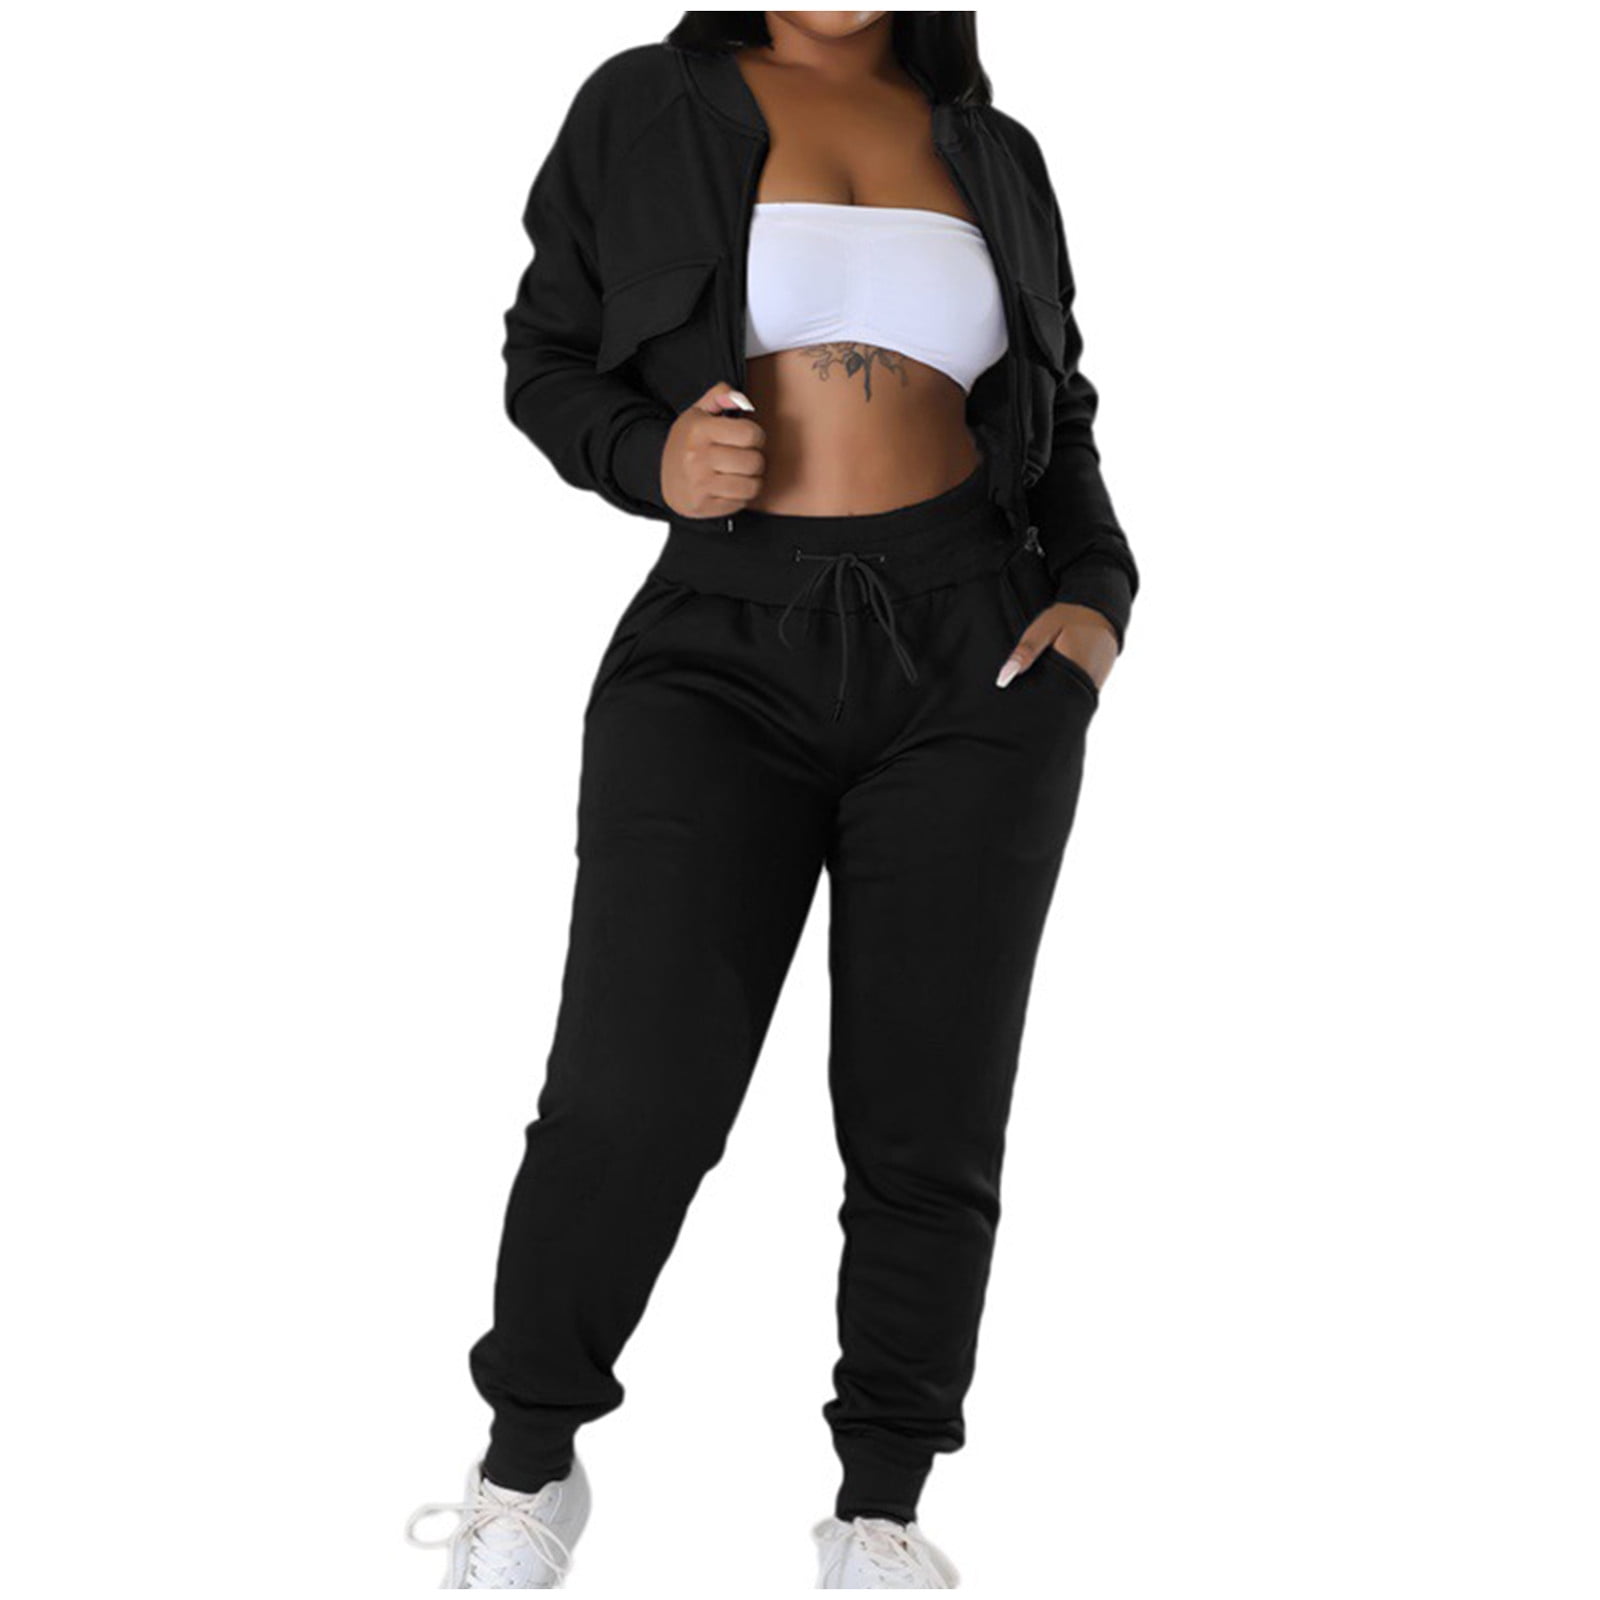 RQYYD Women Two-Piece Athletic Sweatsuits Outfits Long Sleeve Open Front  Zipper Crop Jacket Tops and Drawstring Jogger Pants with Pockets Black XXL  